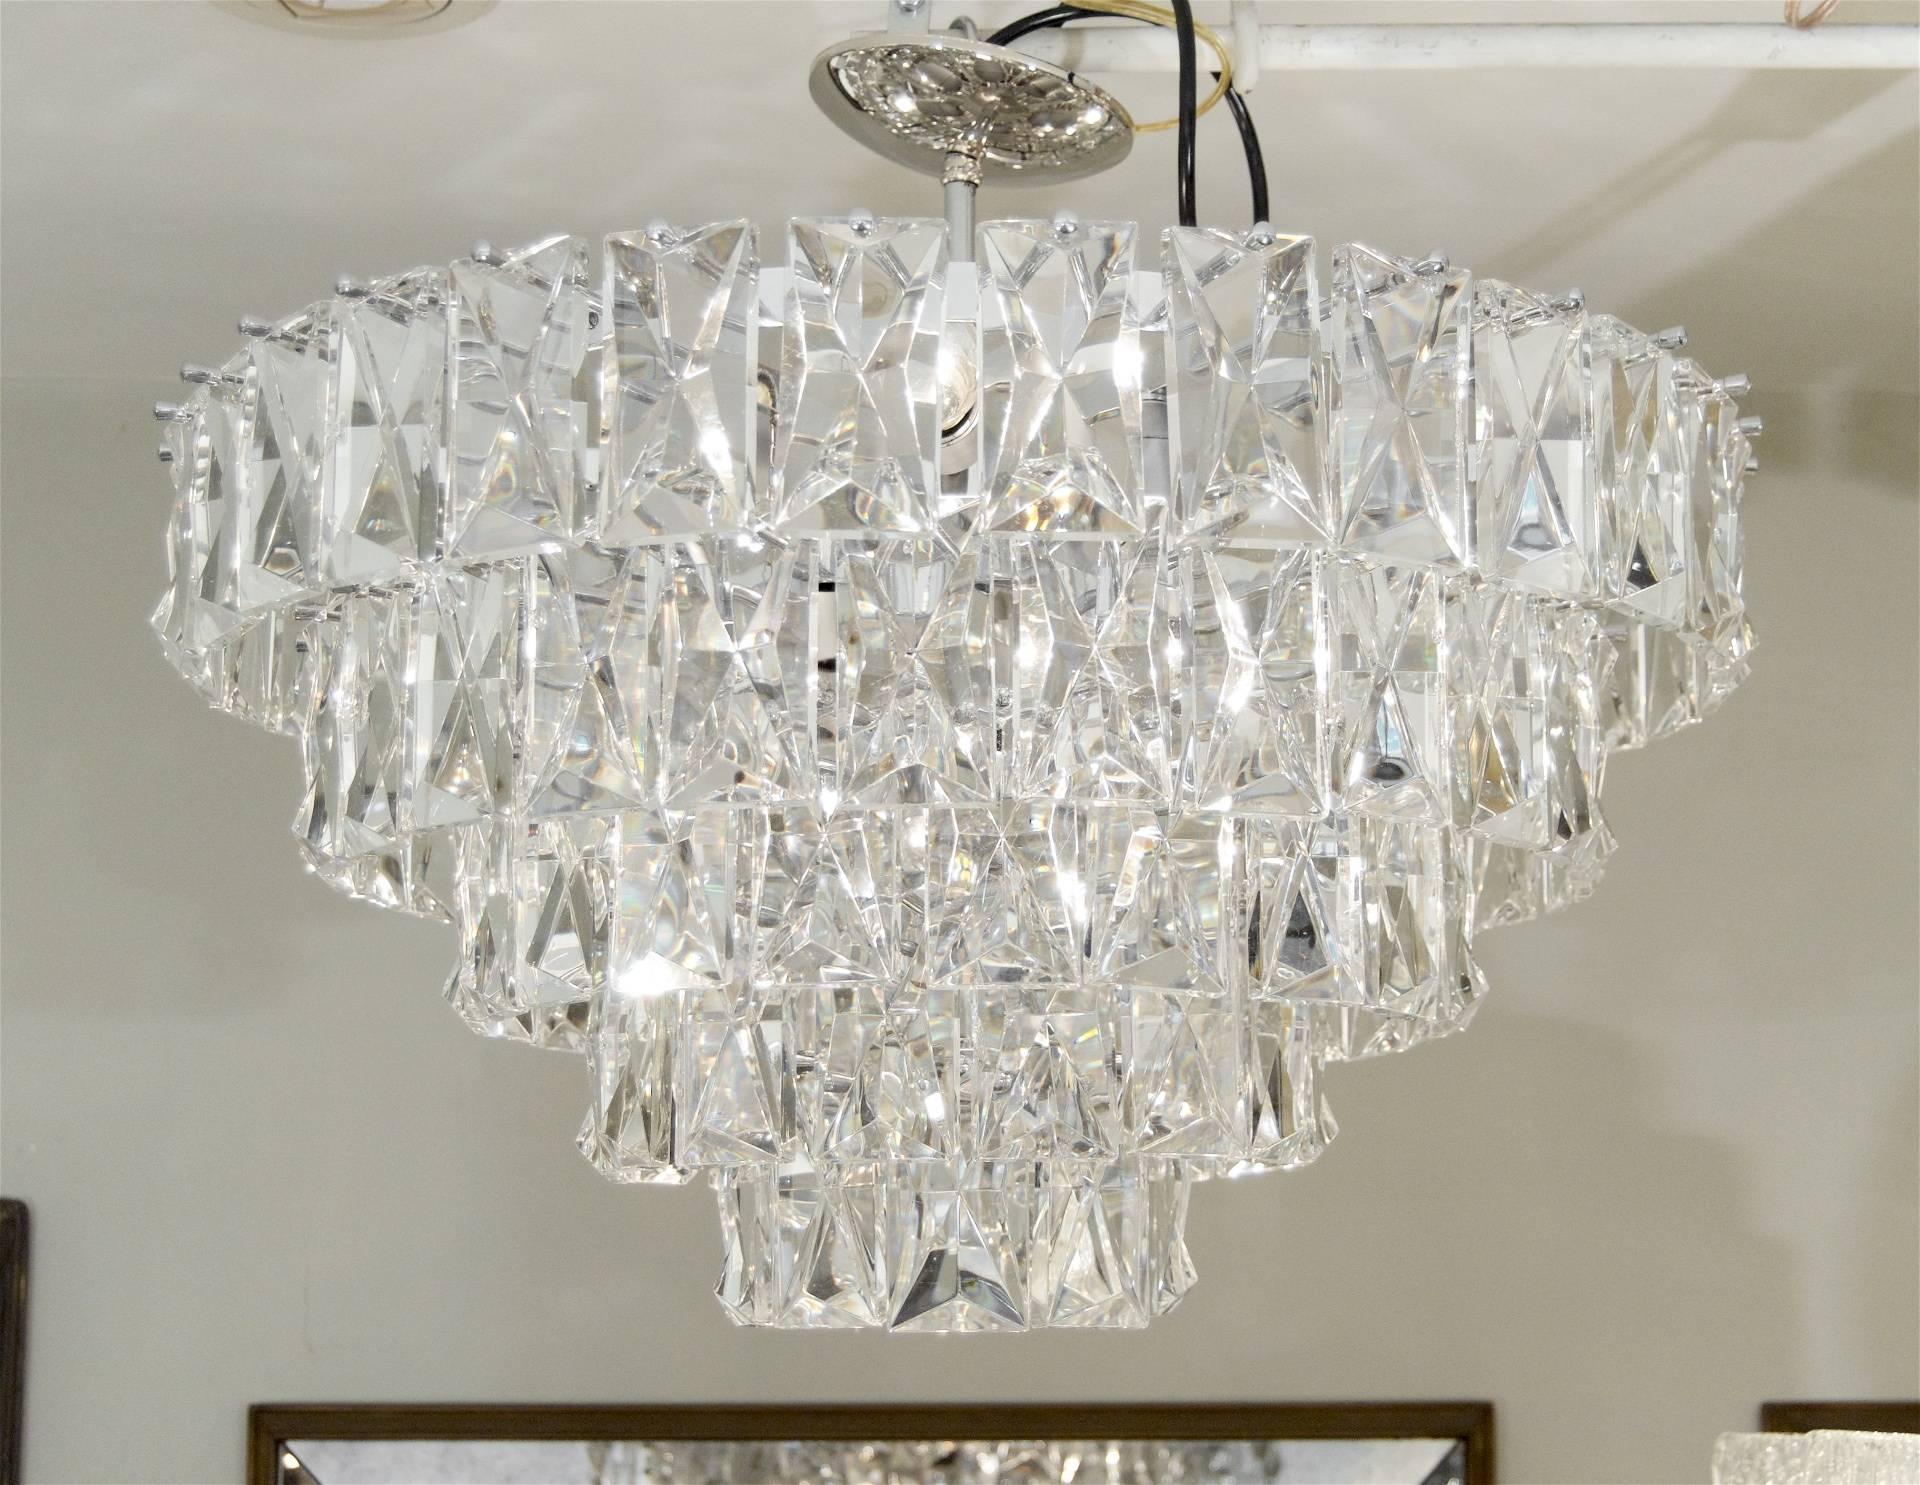 An unusually large chandelier comprising five tiers of faceted rectangular crystals. Both imposing and beautiful, suits a wide variety of decors and is well suited in size for a grand statement.

Takes 13 medium base bulbs up to 60 watts per bulb,